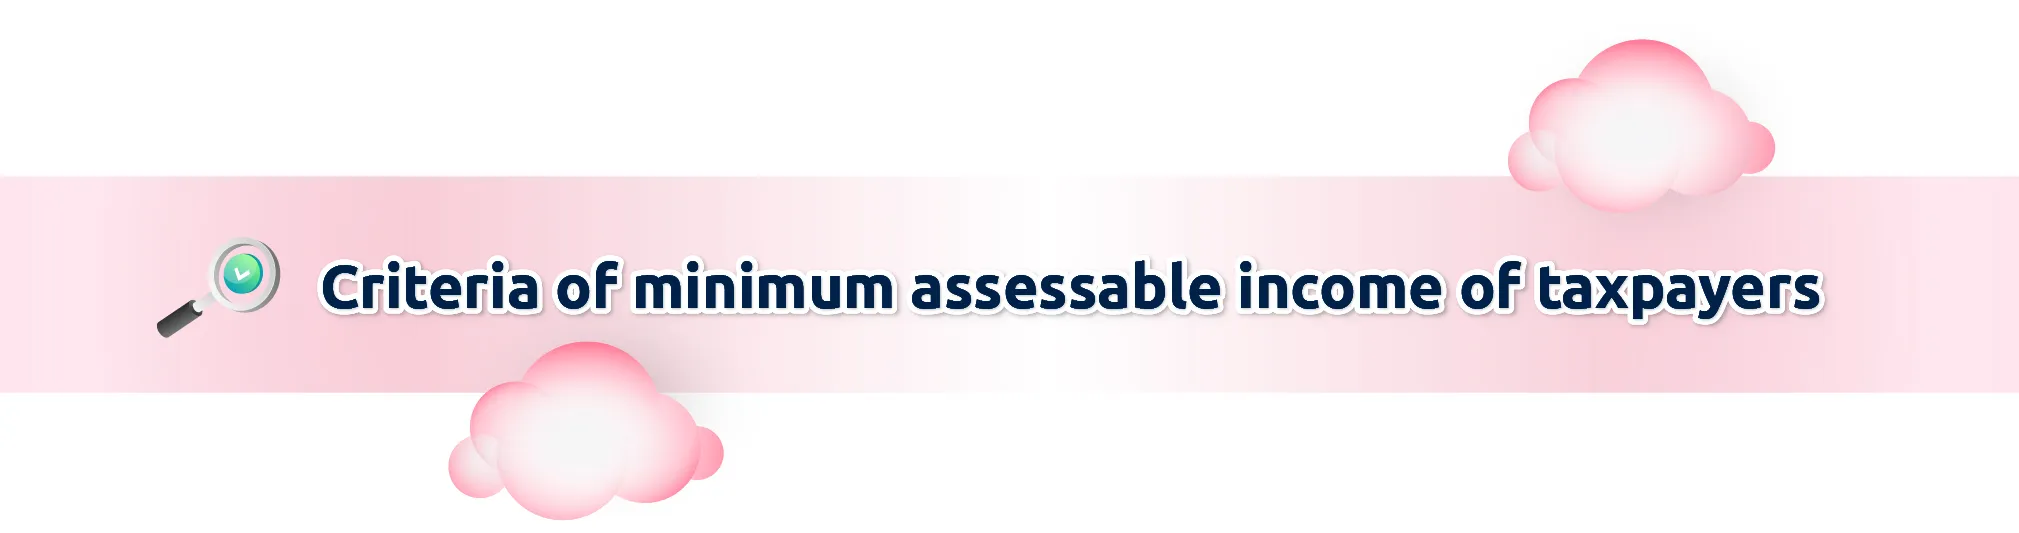 Criteria of minimum assessable income of taxpayers